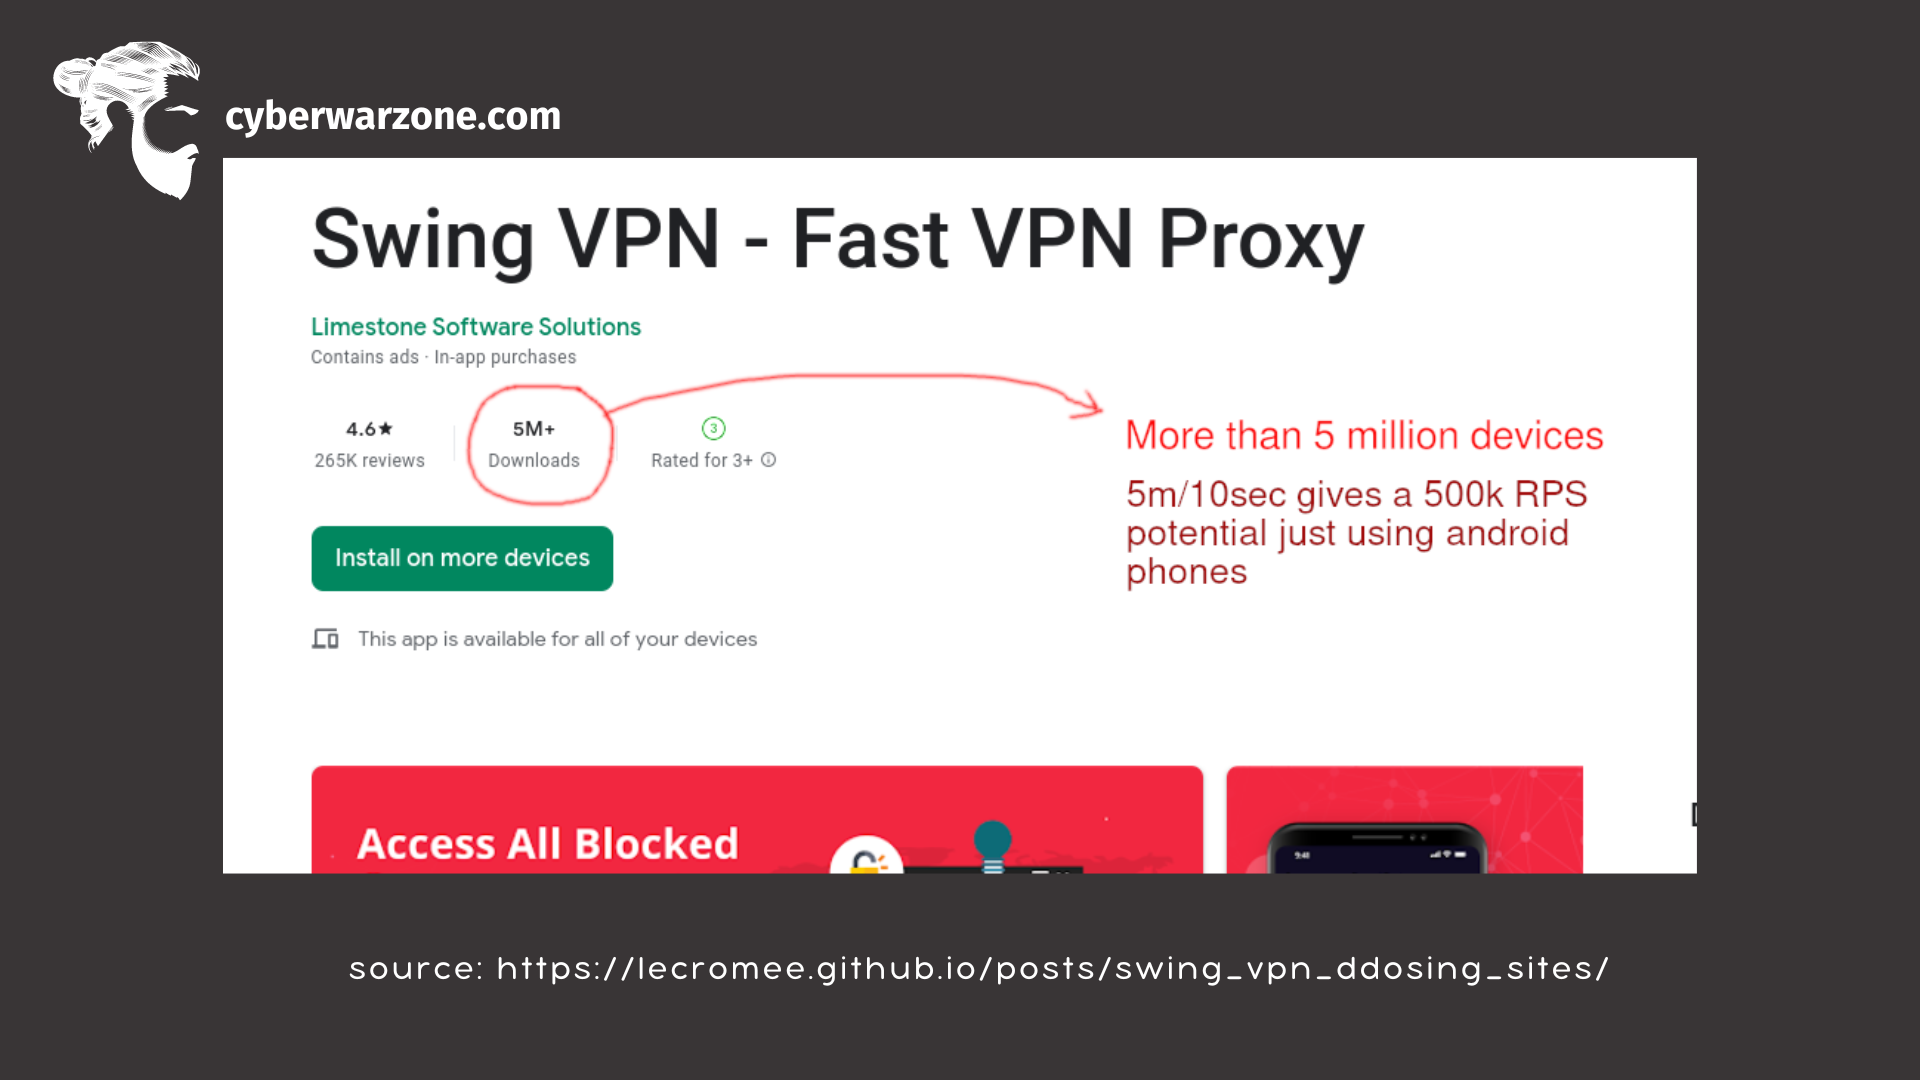 Swing VPN Accused of Launching DDoS Attacks Through Users' Phones